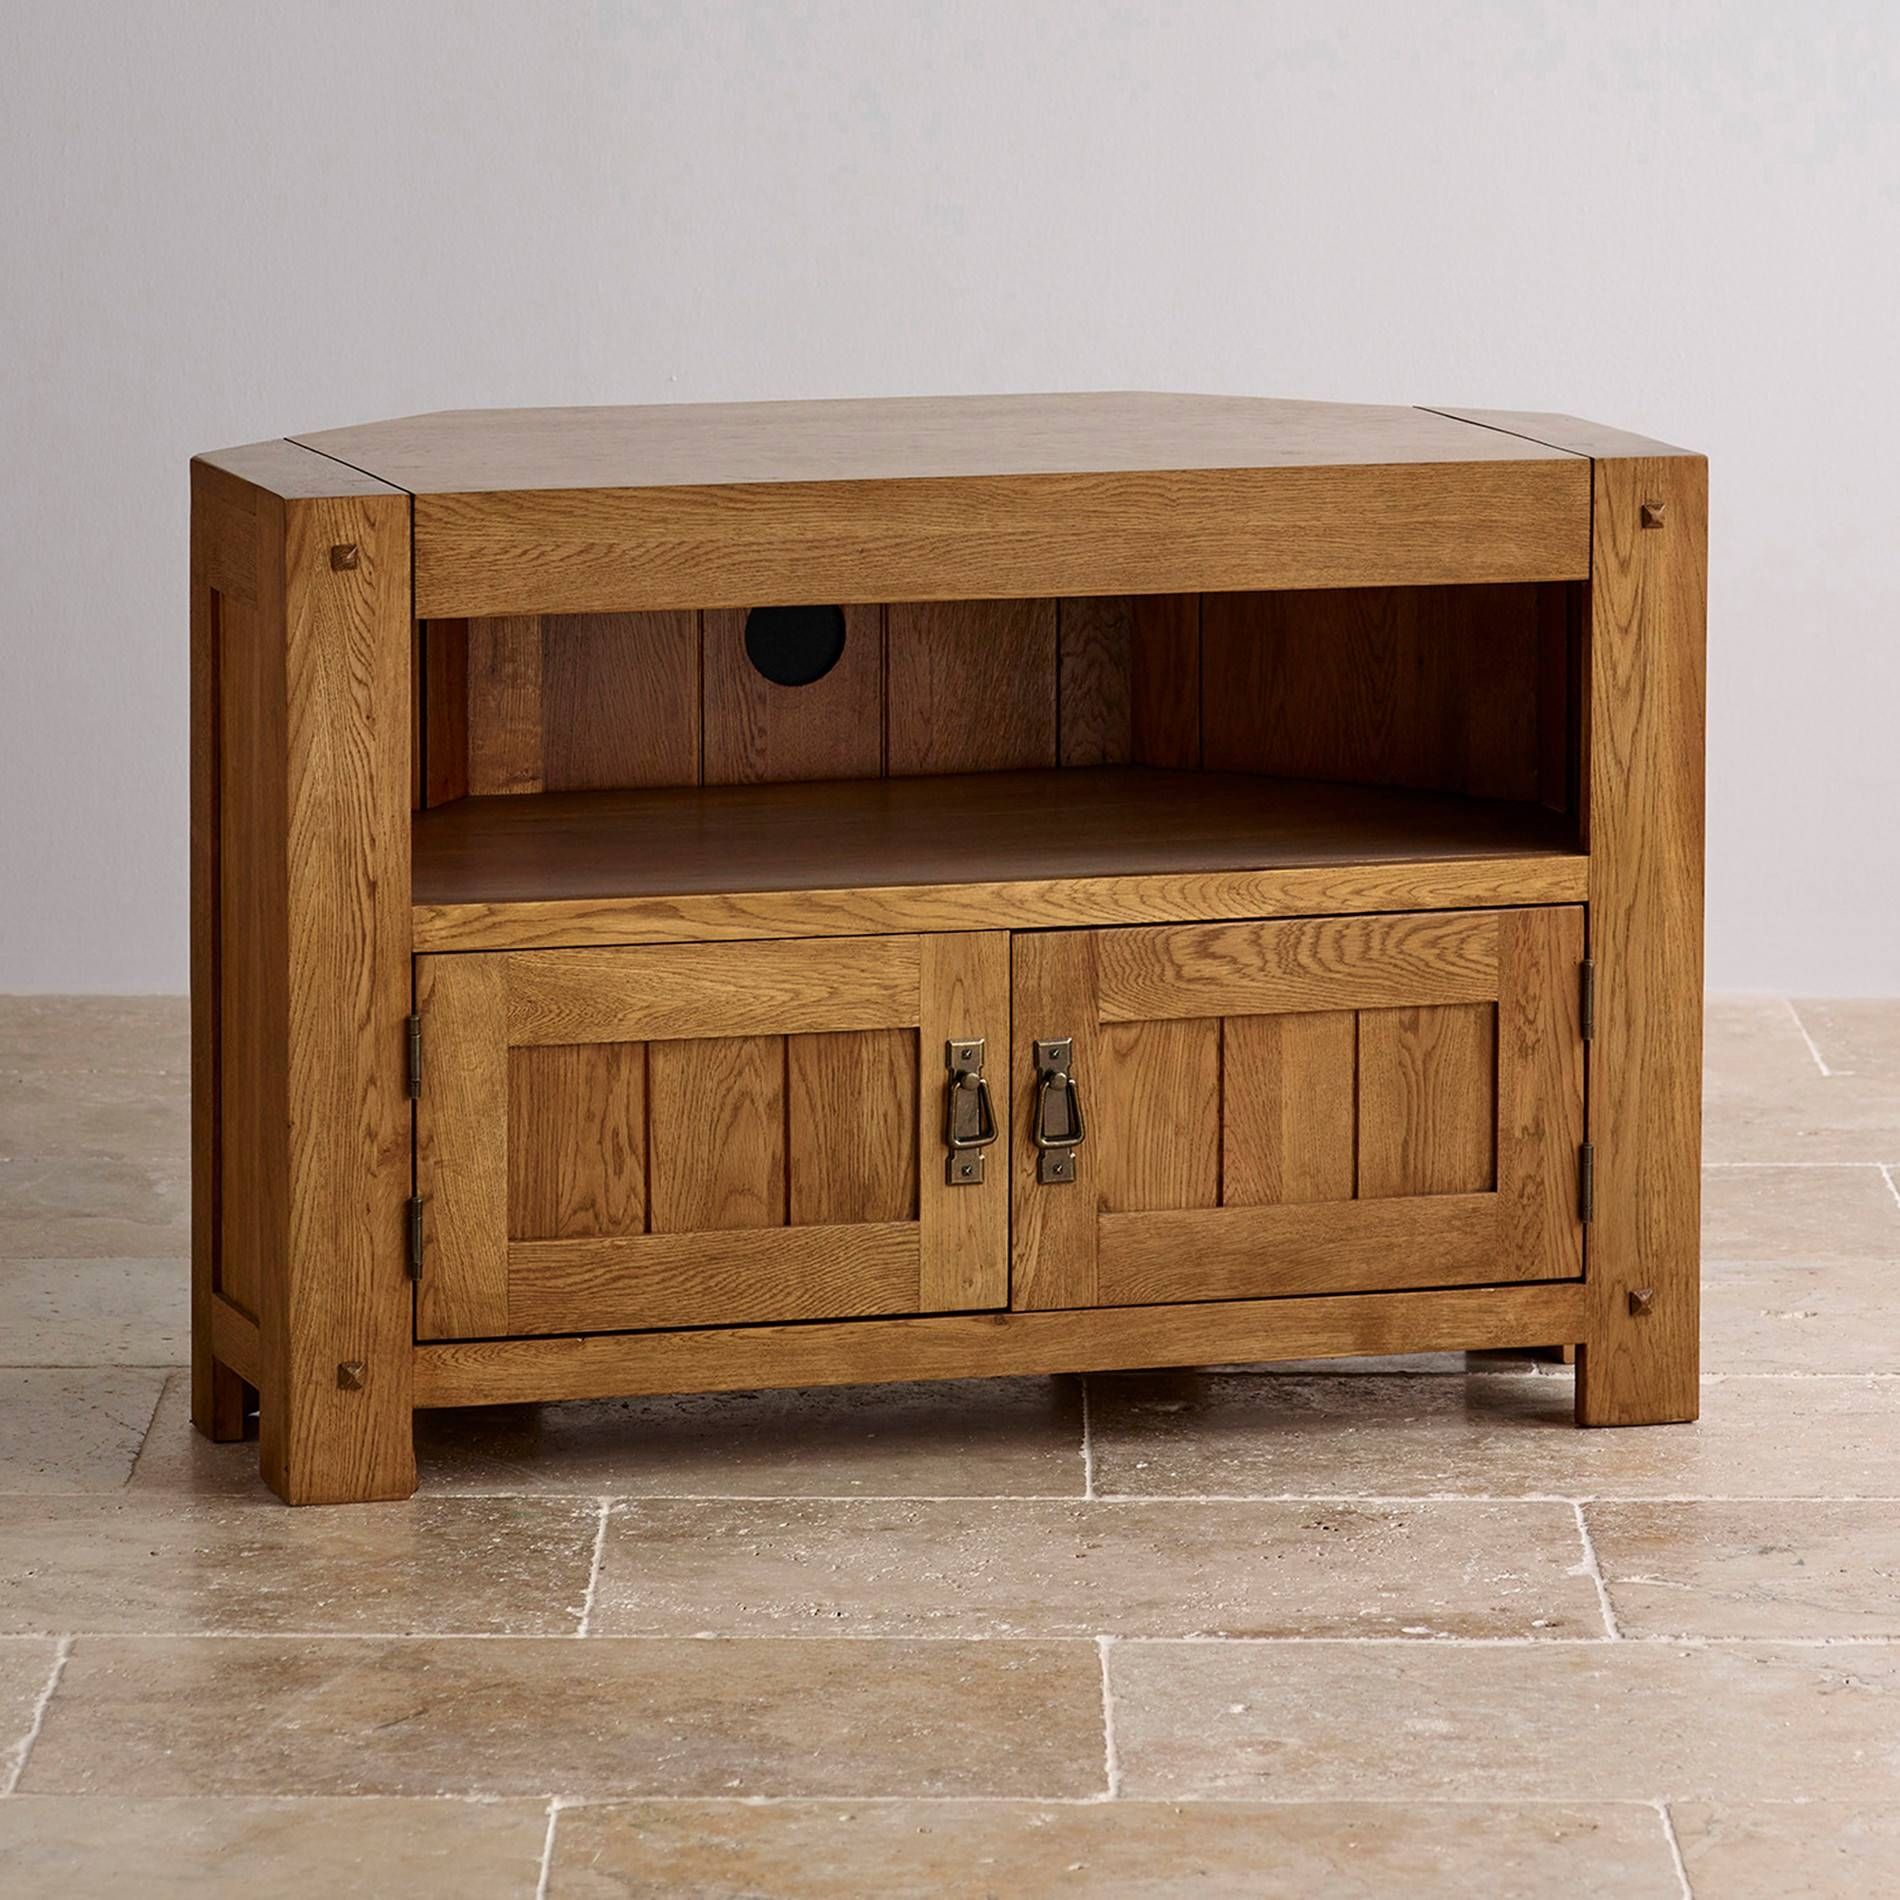 Quercus Corner Tv Cabinet In Rustic Oak | Oak Furniture Land Intended For Solid Wood Corner Tv Cabinets (View 1 of 15)